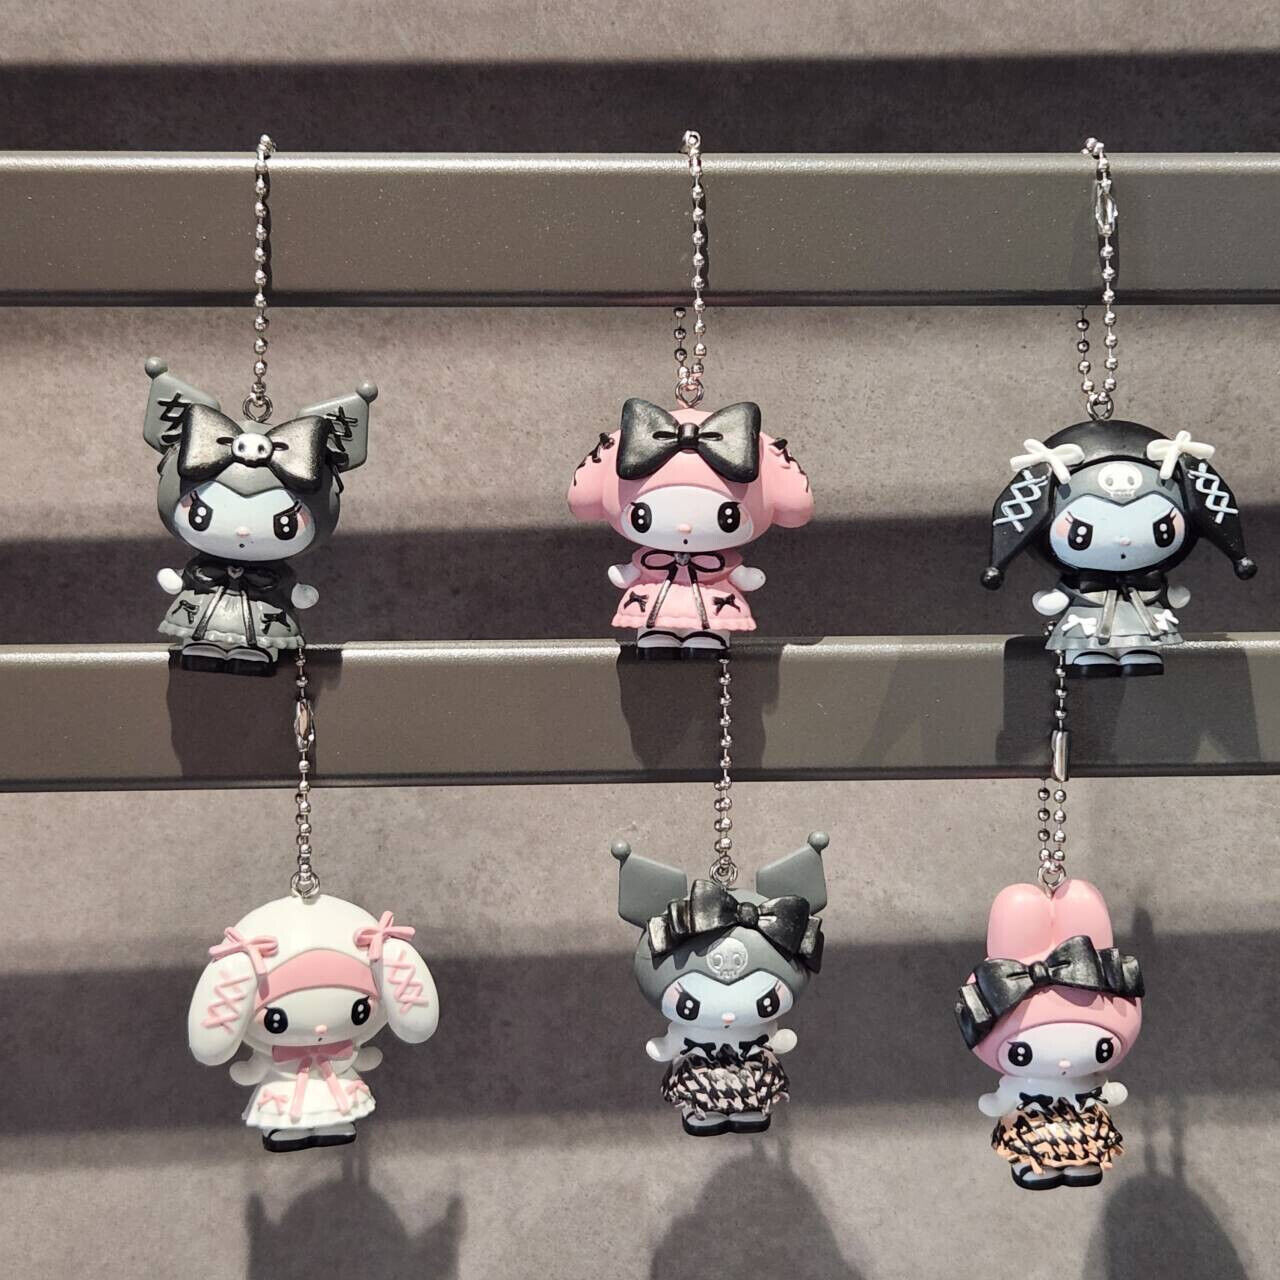 6pcs/set Cute Kuromi My Melody Figures PVC Doll Toy Keychain Pendant Collection